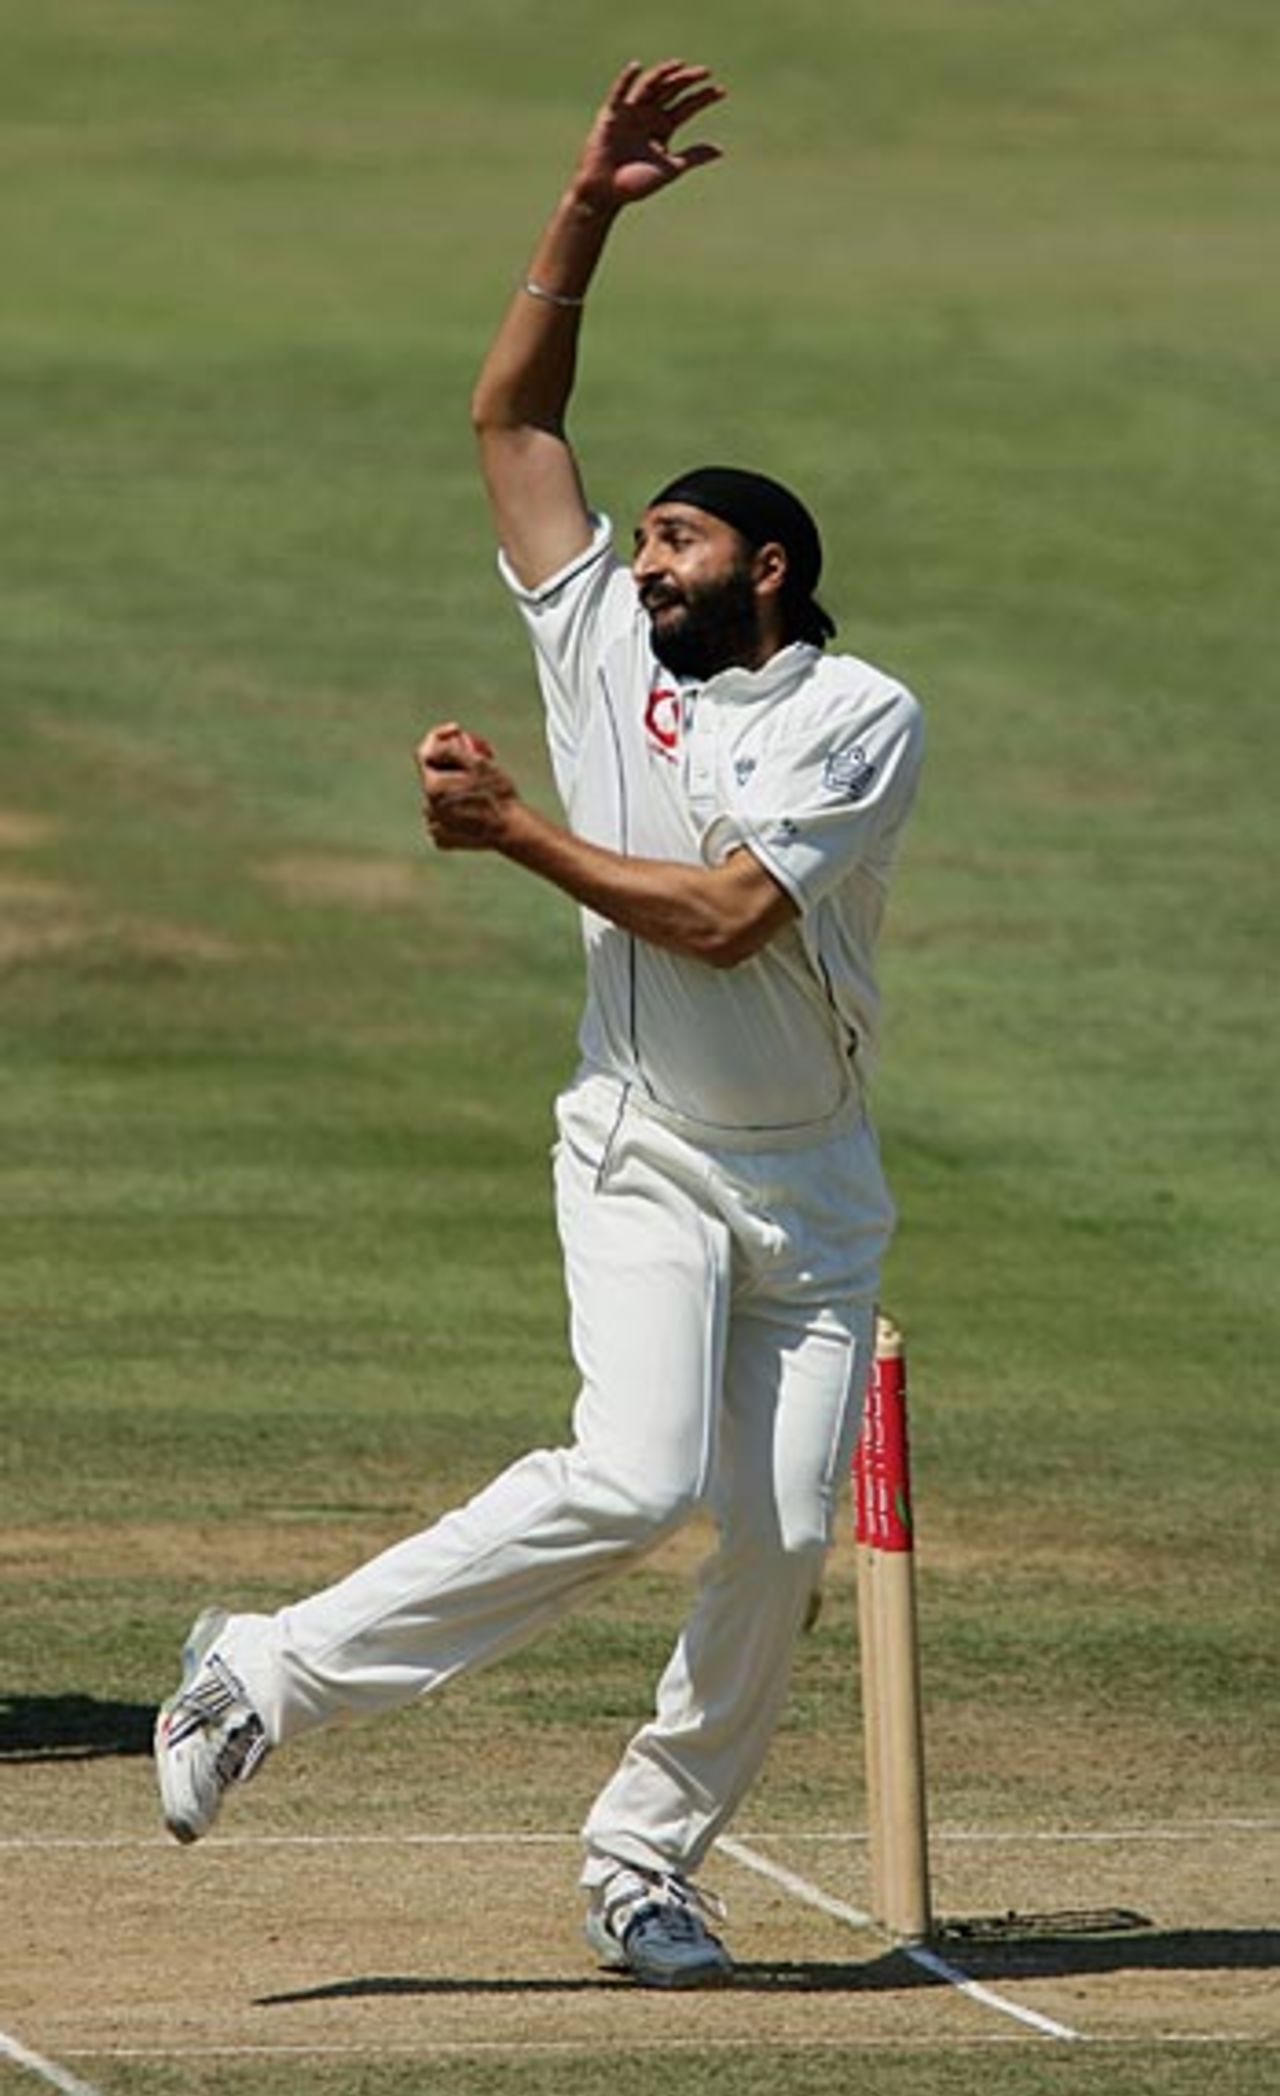 Monty Panesar turns his arm over during his impressive spell after lunch, England v Pakistan, 1st Test, Lord's, July 17, 2006